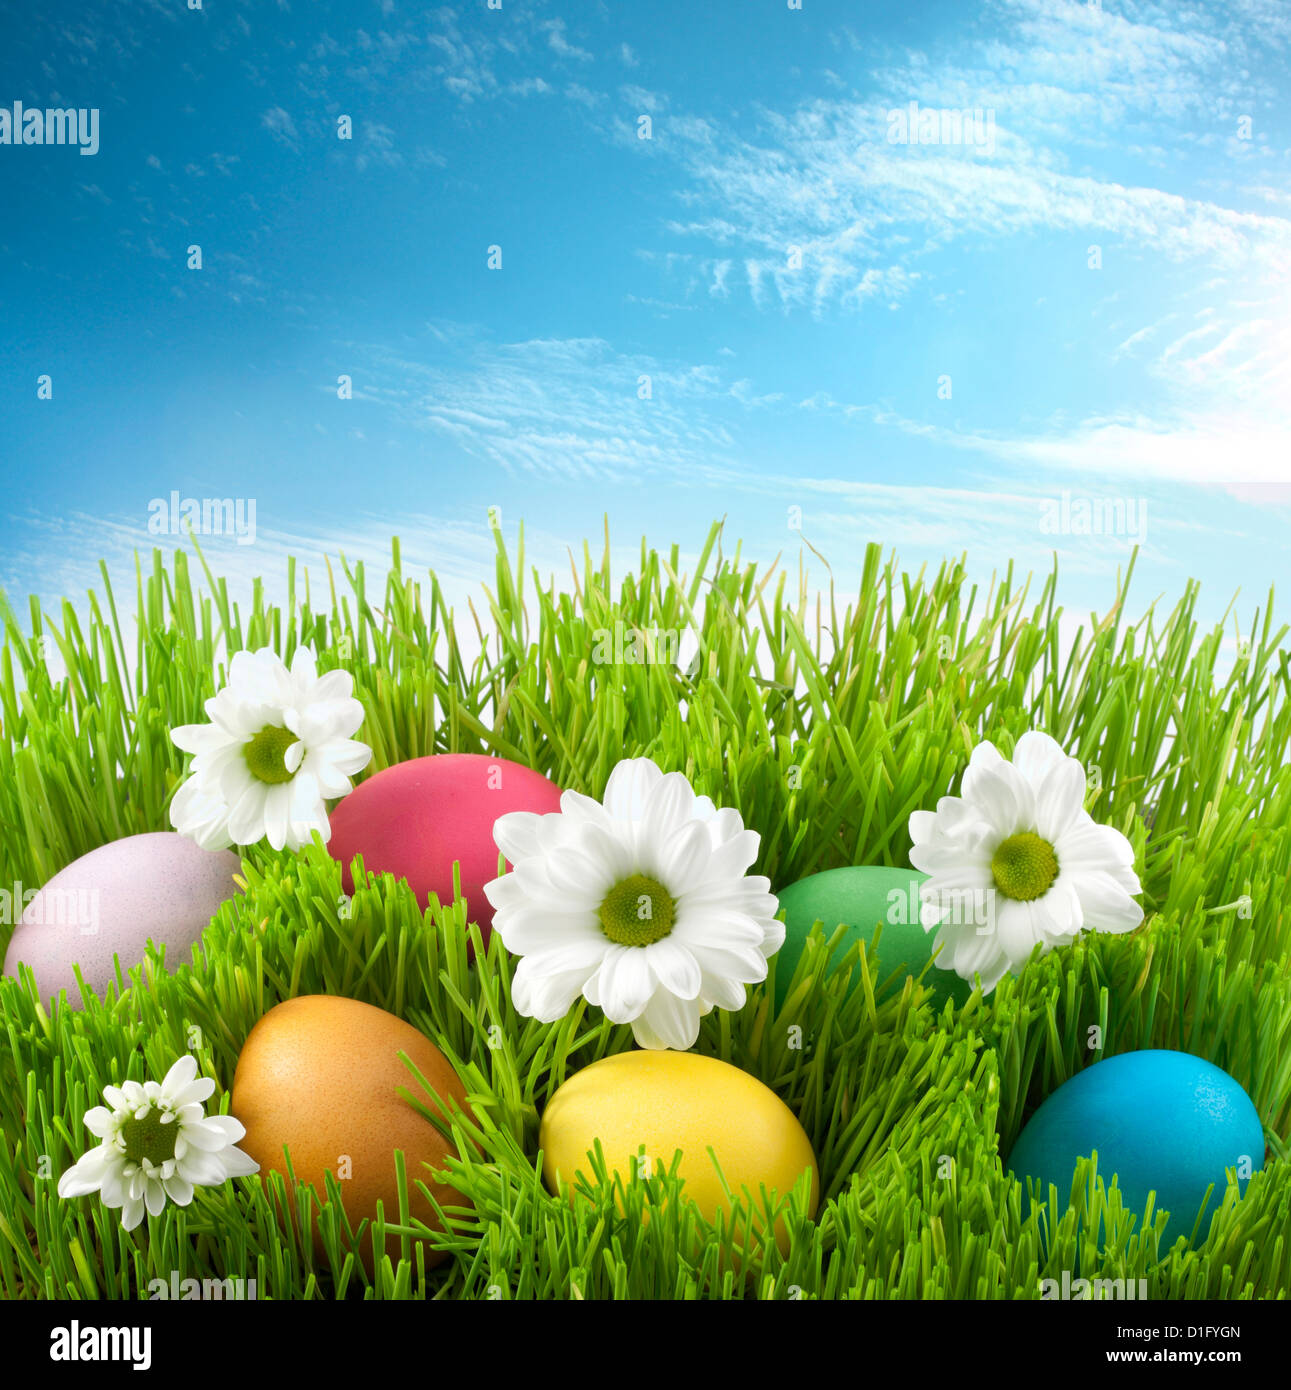 Concept of easter eggs on green grass and yellow straw with flowers background against abstract sky Stock Photo